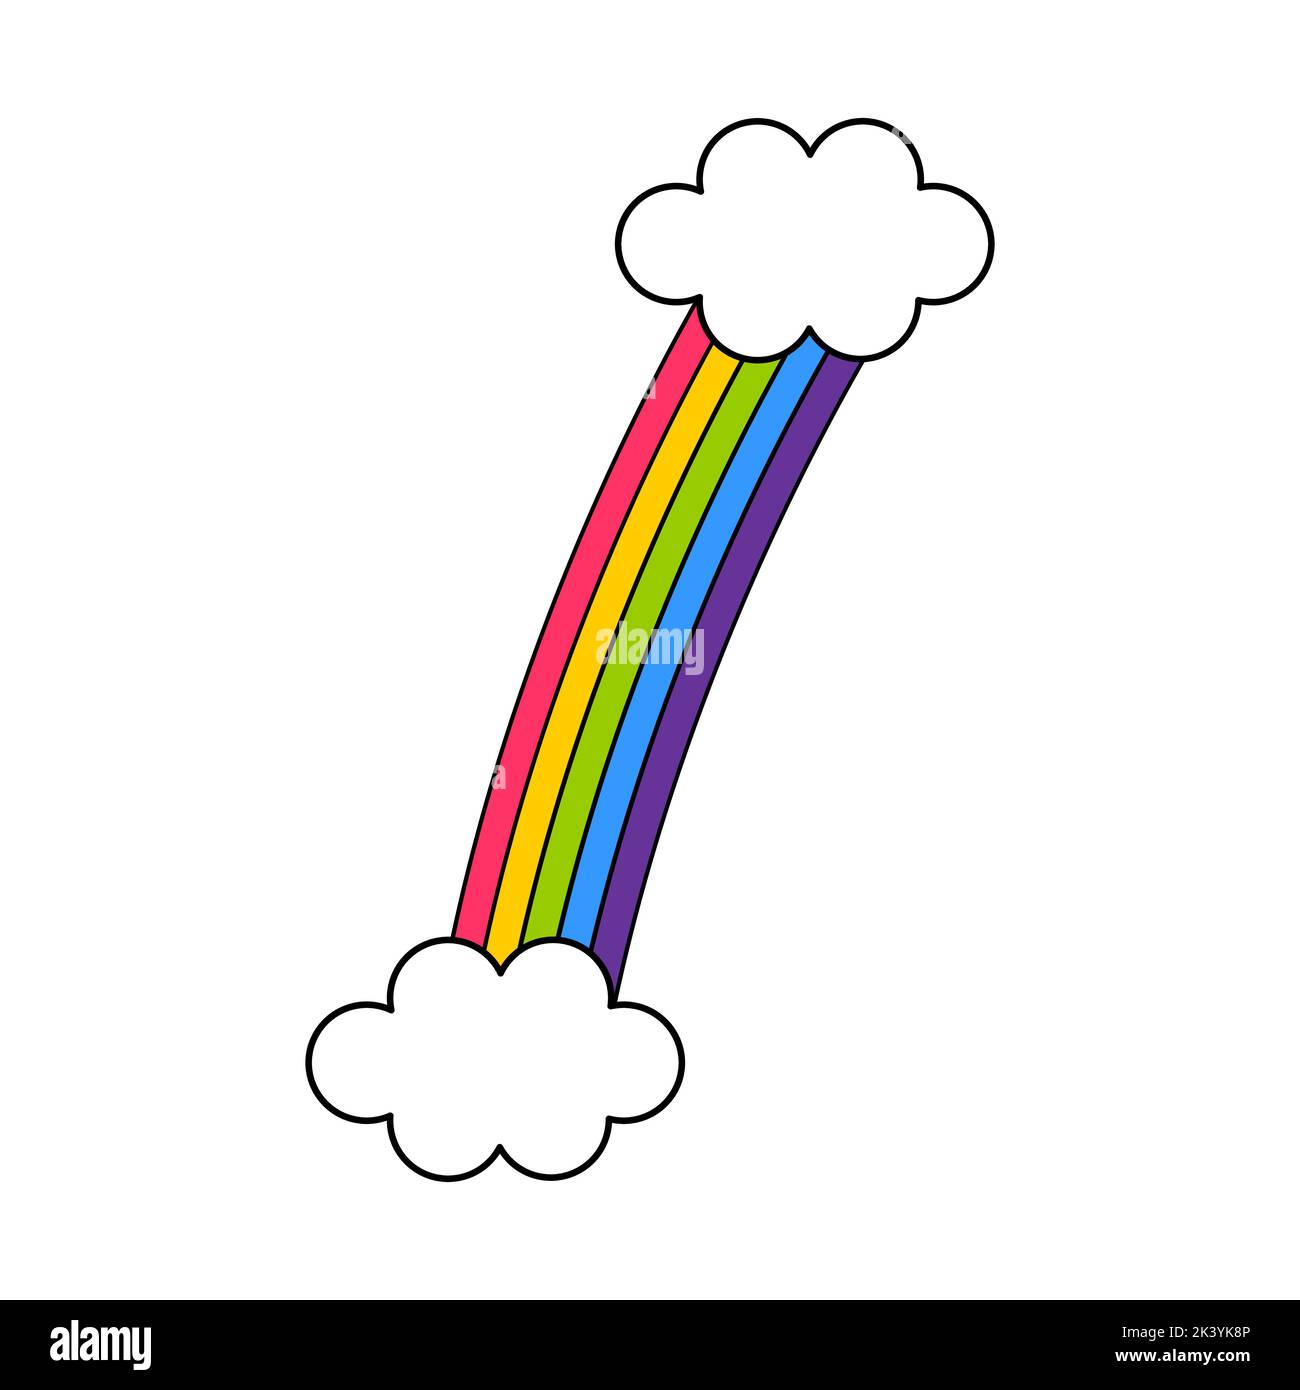 Flat image of a rainbow and clouds. Vector illustration Stock Vector